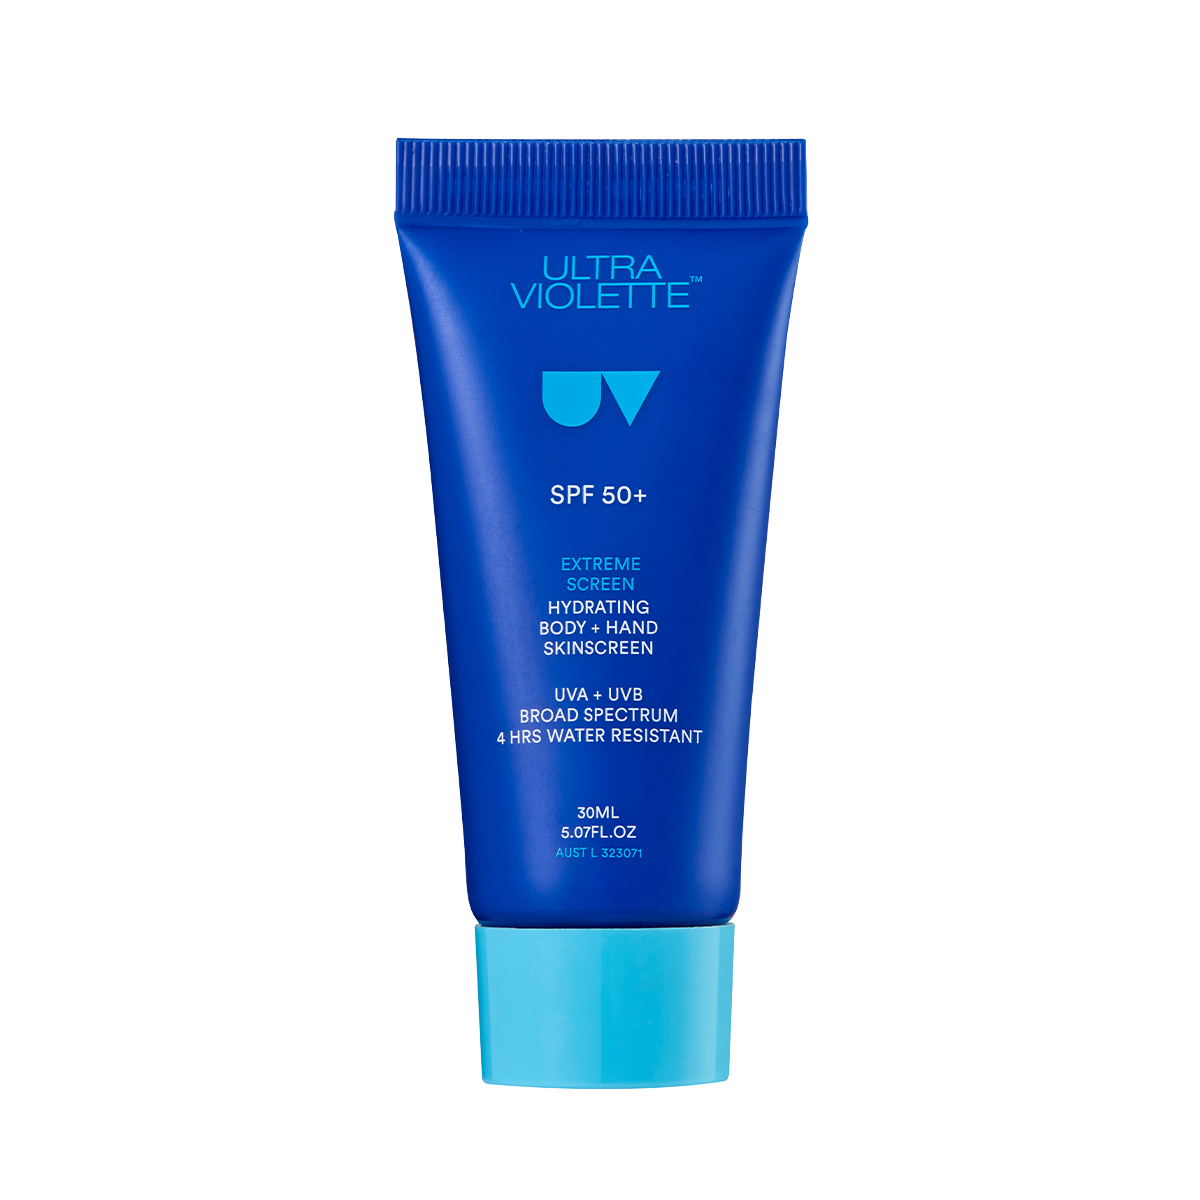 Extreme Screen Body & Hand <br> SPF50 50ml